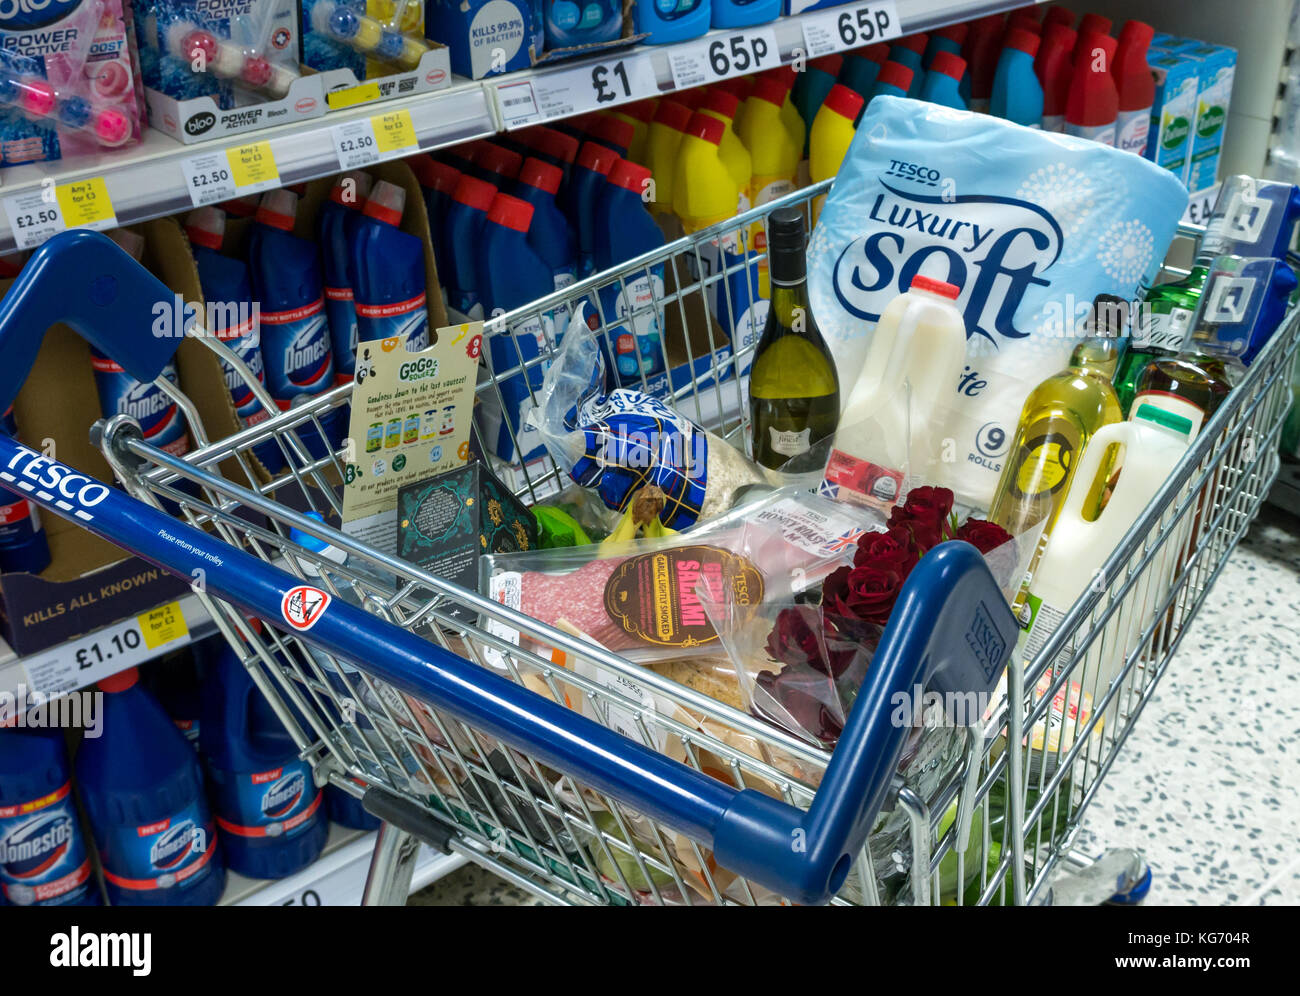 A shopping trolley full of groceries in supermarket in the household cleaning products aisle, Scotland, UK Stock Photo